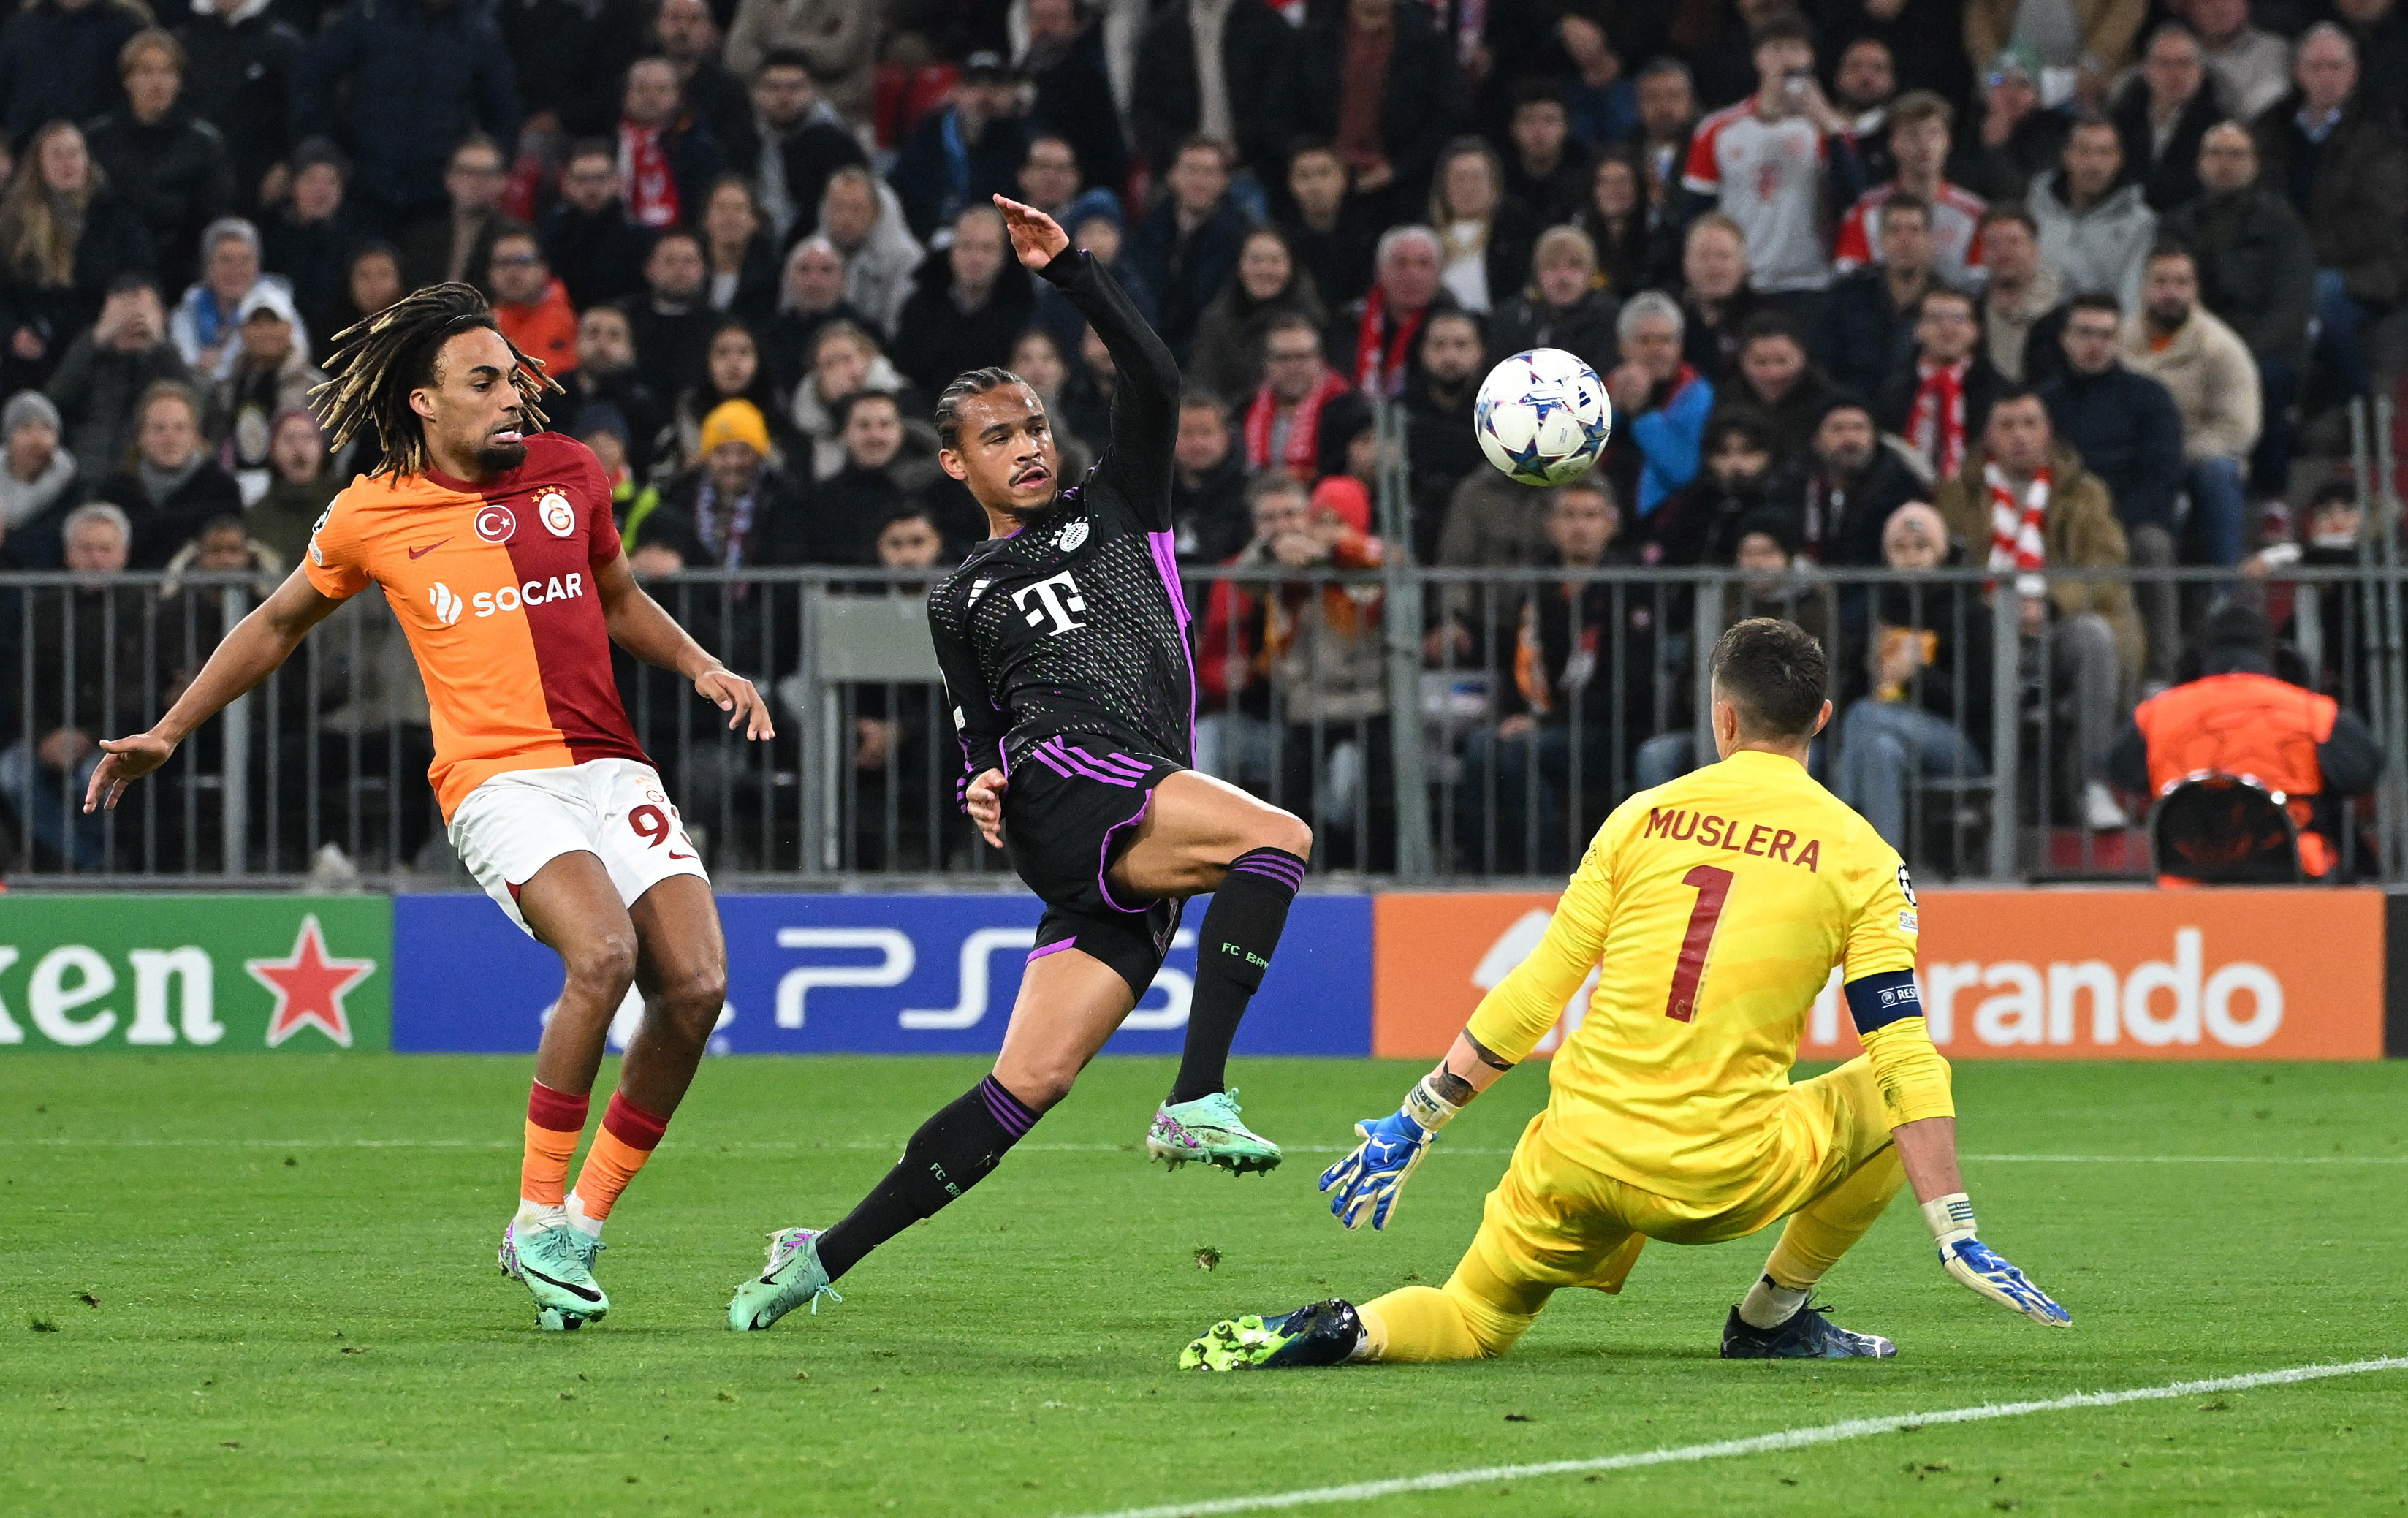 Late Kane double sends Bayern 2-1 past Galatasaray and into last 16